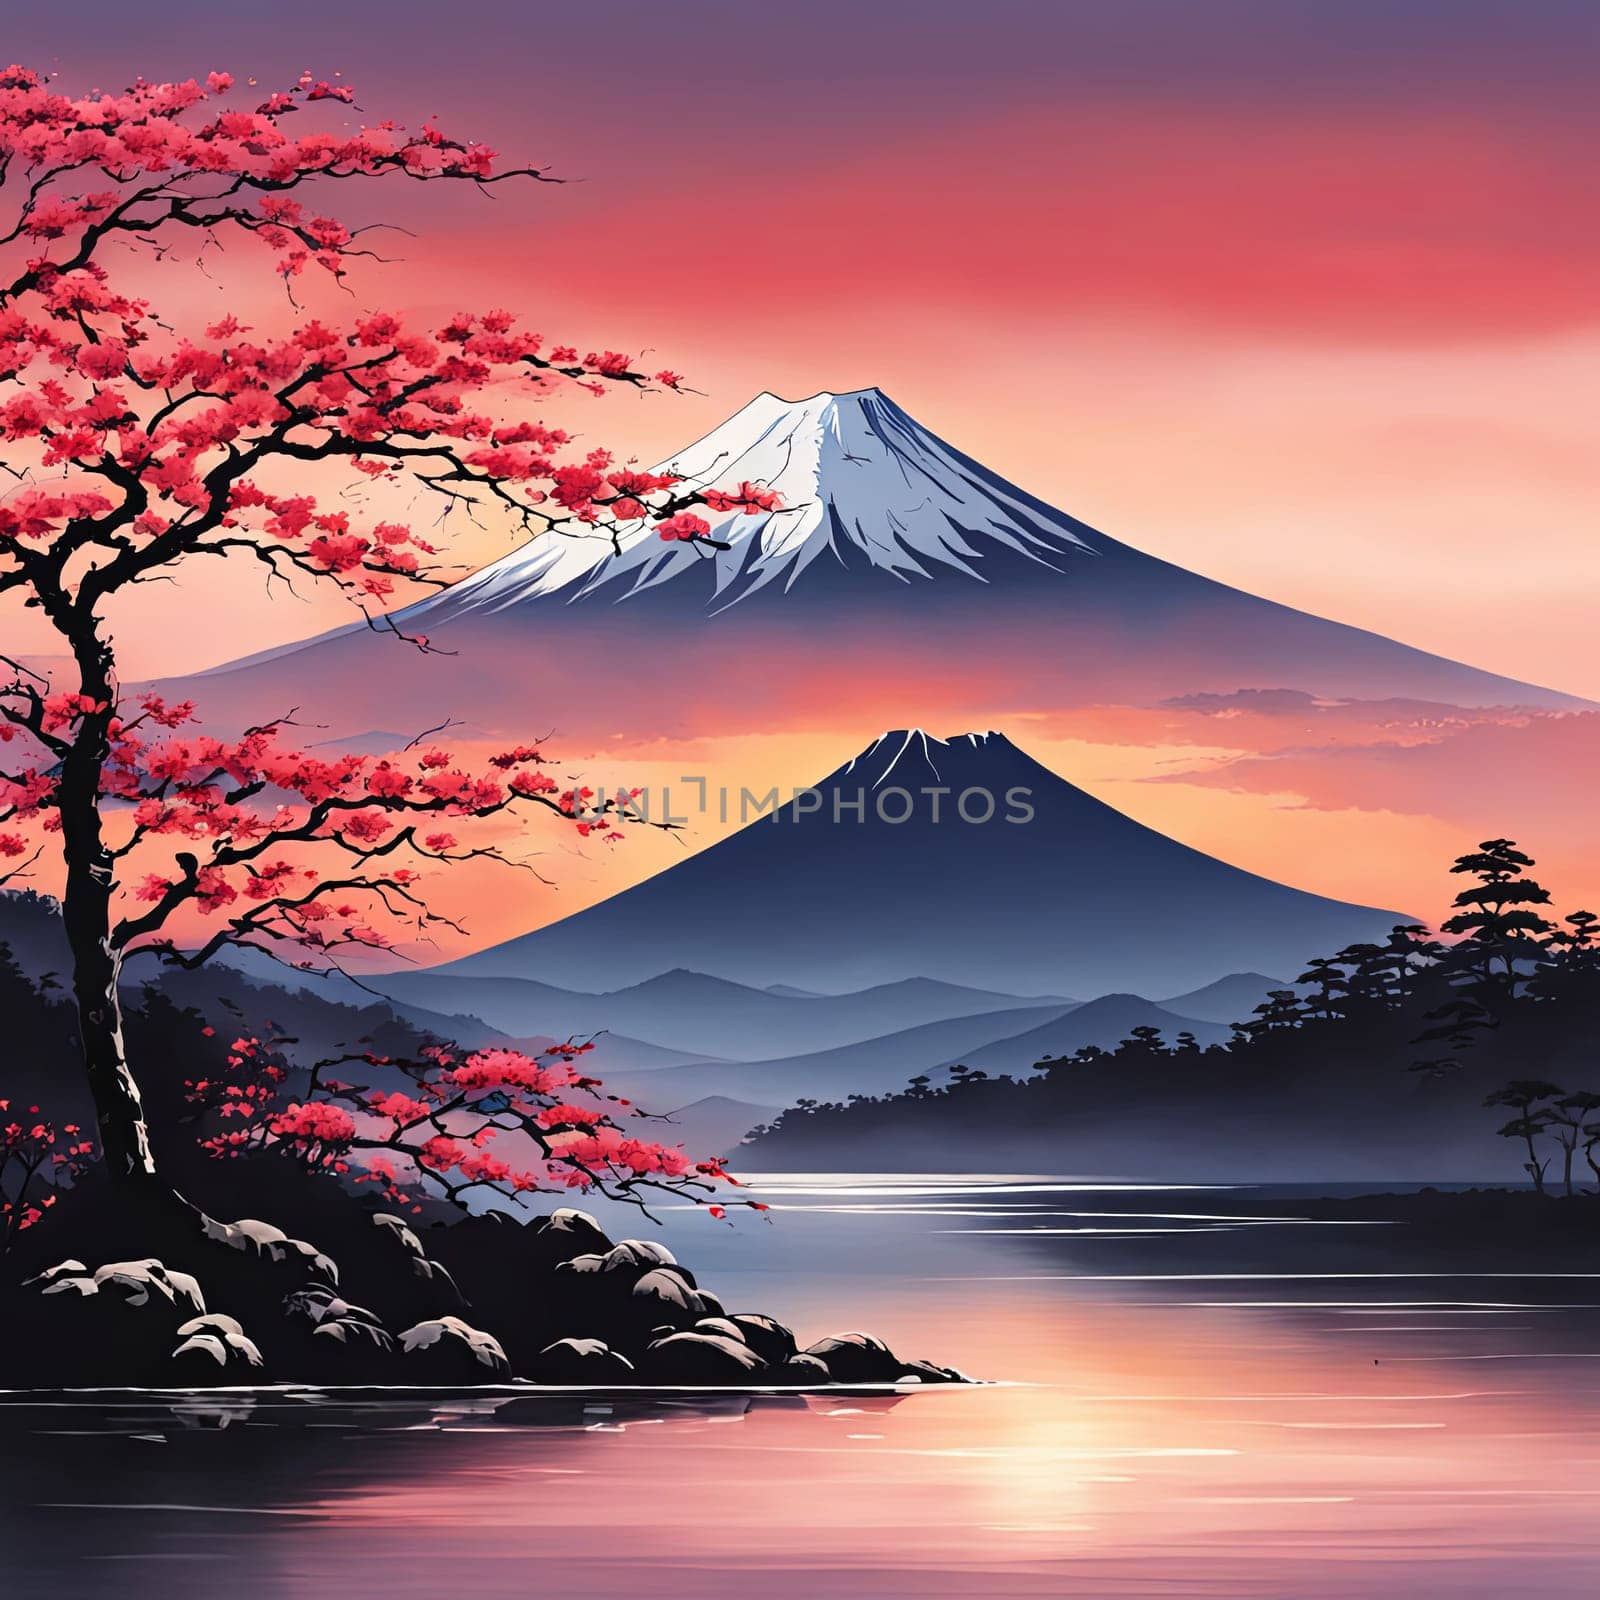 Serene Japanese landscape with mountain, cherry blossom tree. Cherry blossoms are in full bloom, creating beautiful, peaceful atmosphere. For interior, commercial spaces to create stylish atmosphere